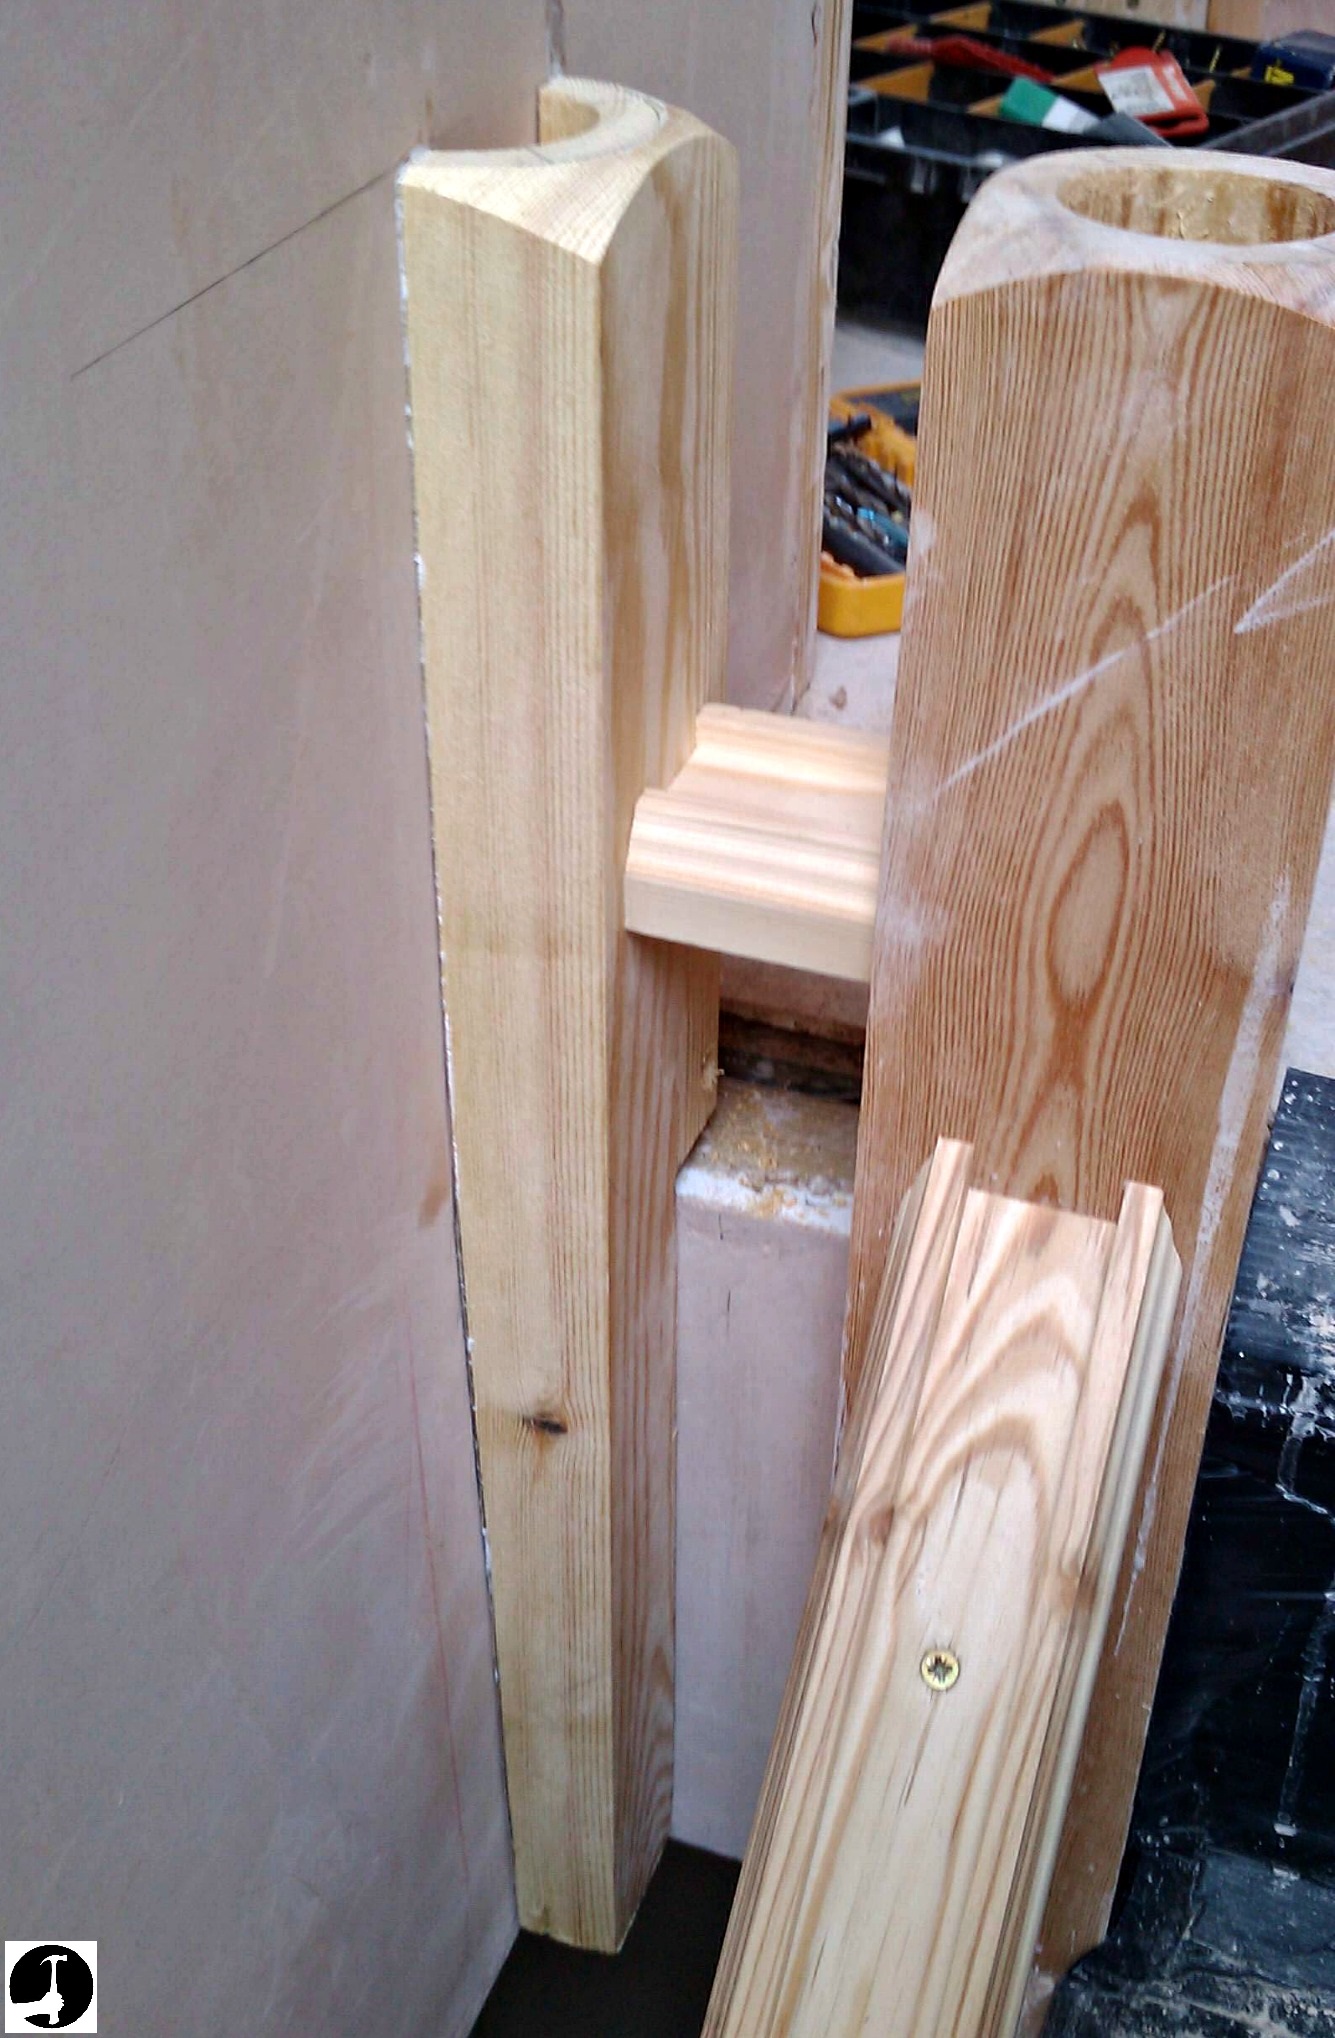 Half newel base cut and glued to the wall